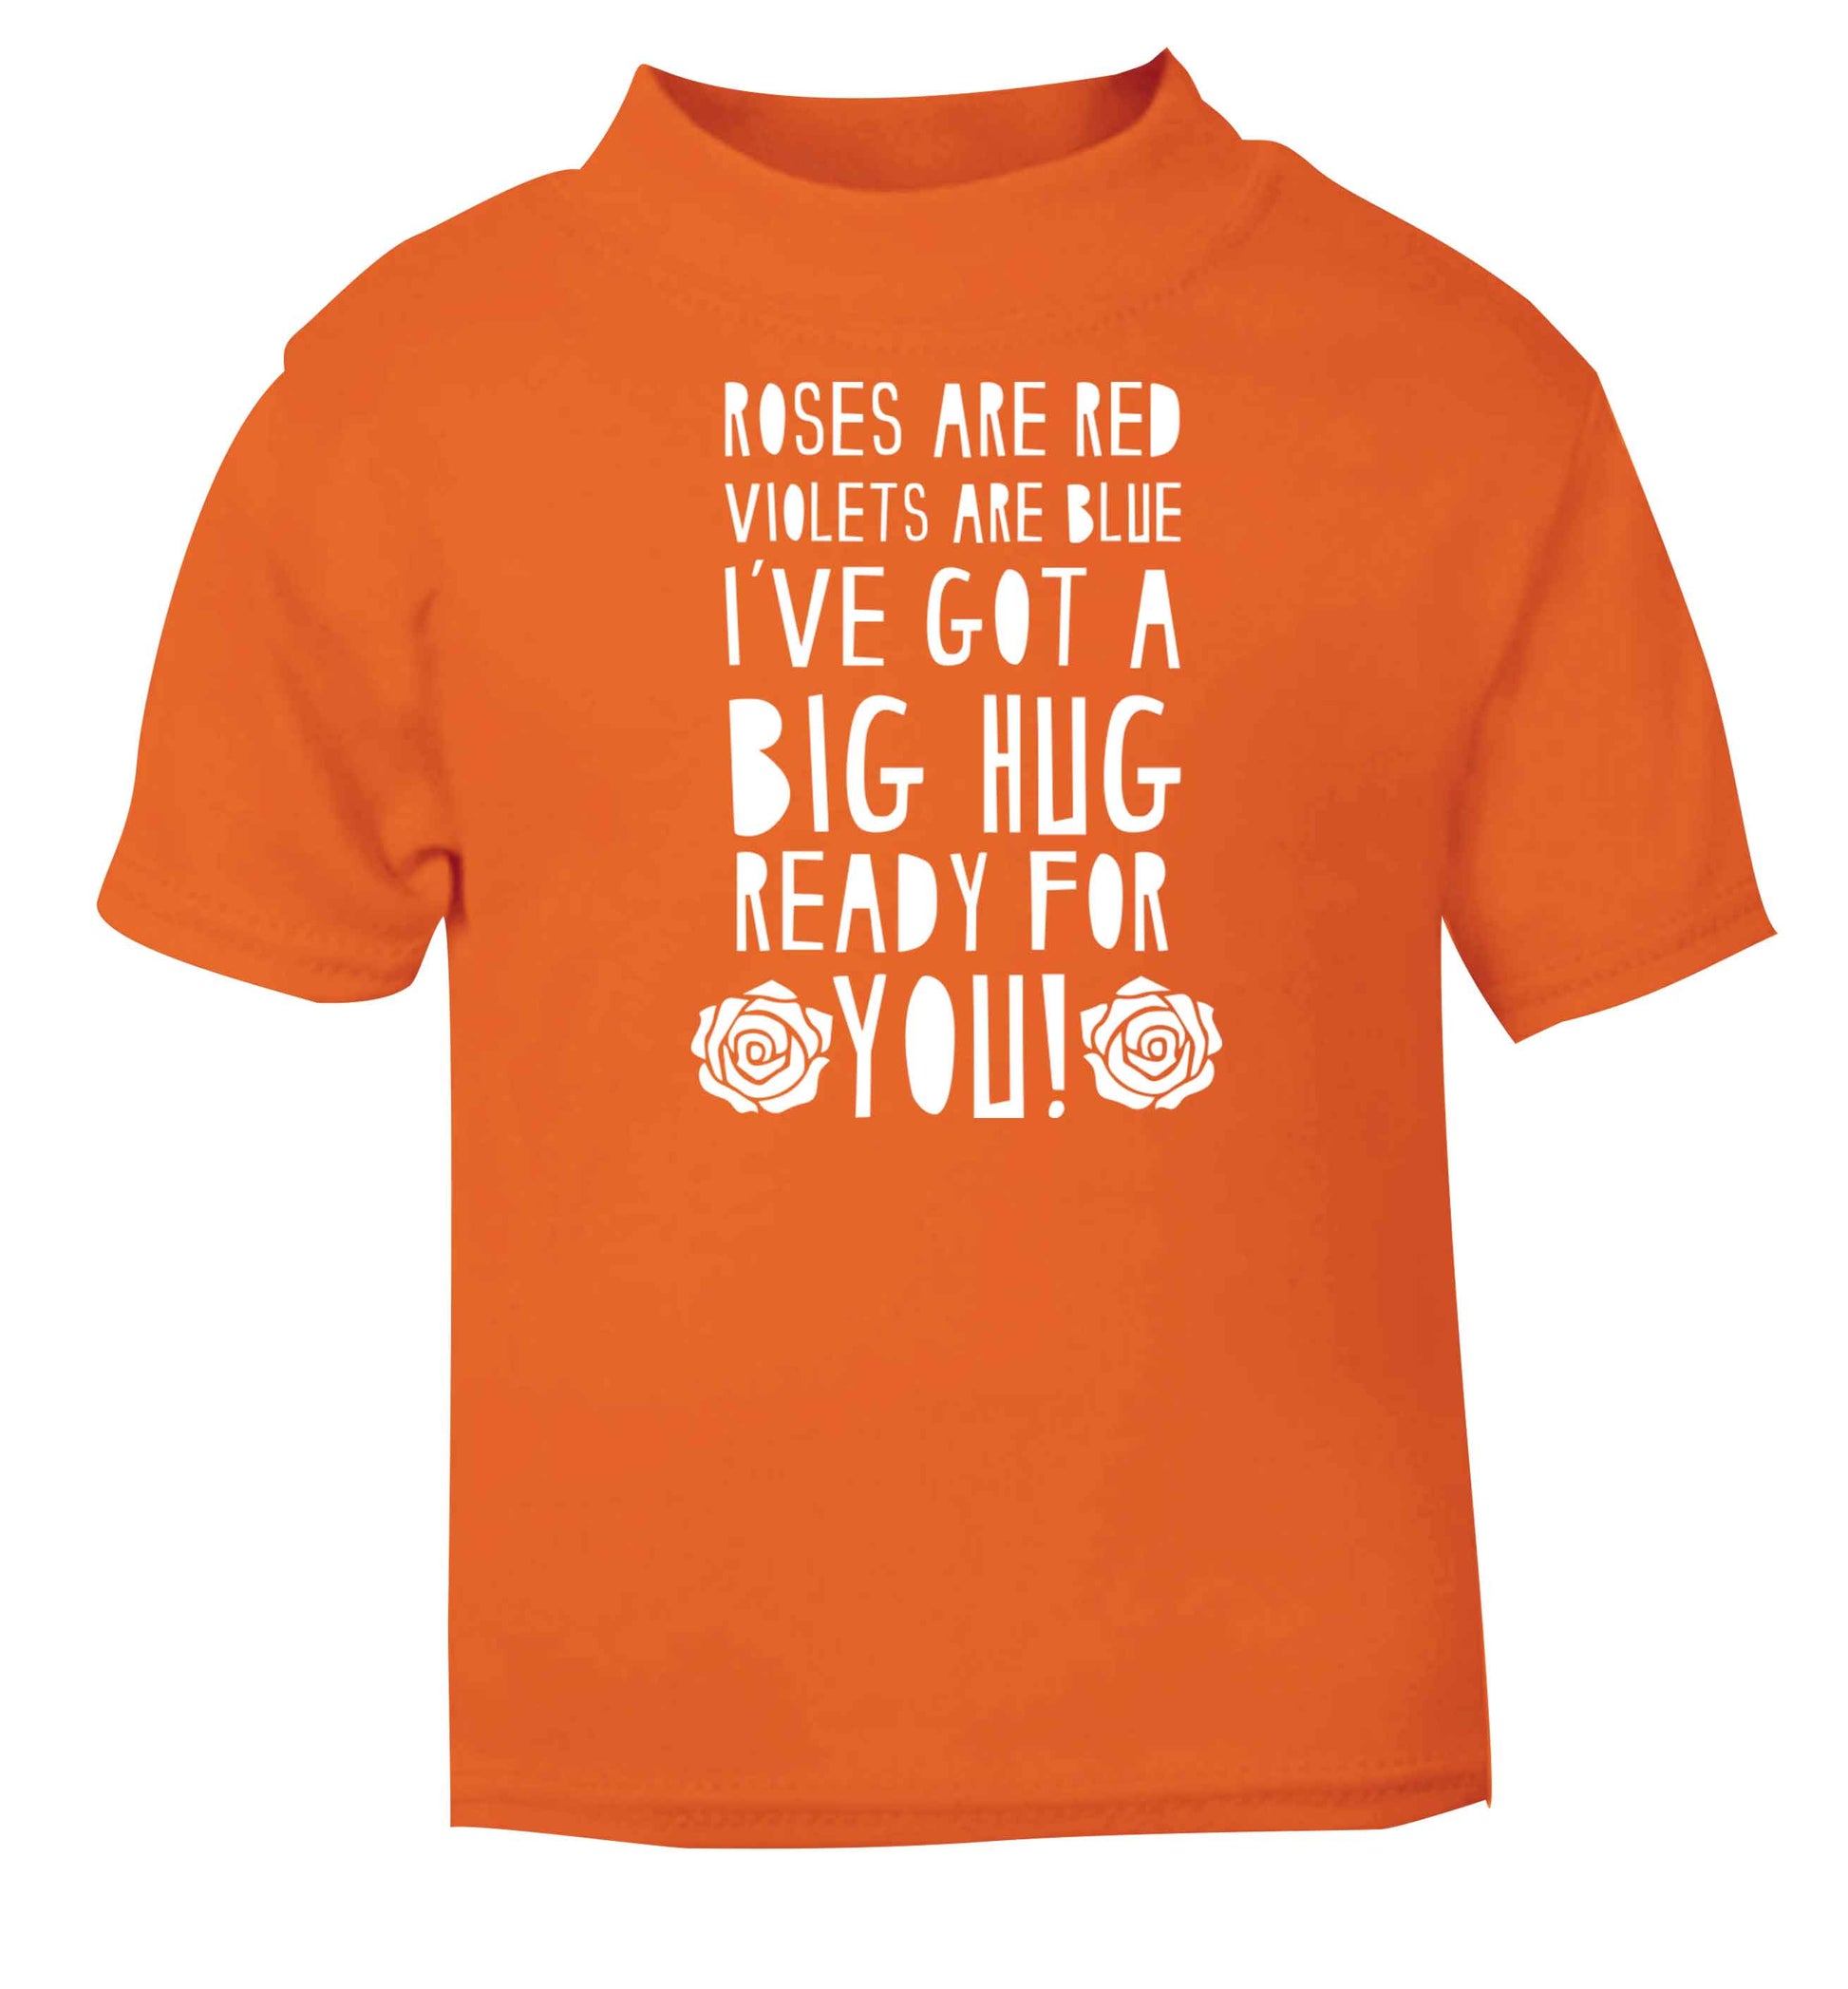 Roses are red violets are blue I've got a big hug coming for you orange baby toddler Tshirt 2 Years